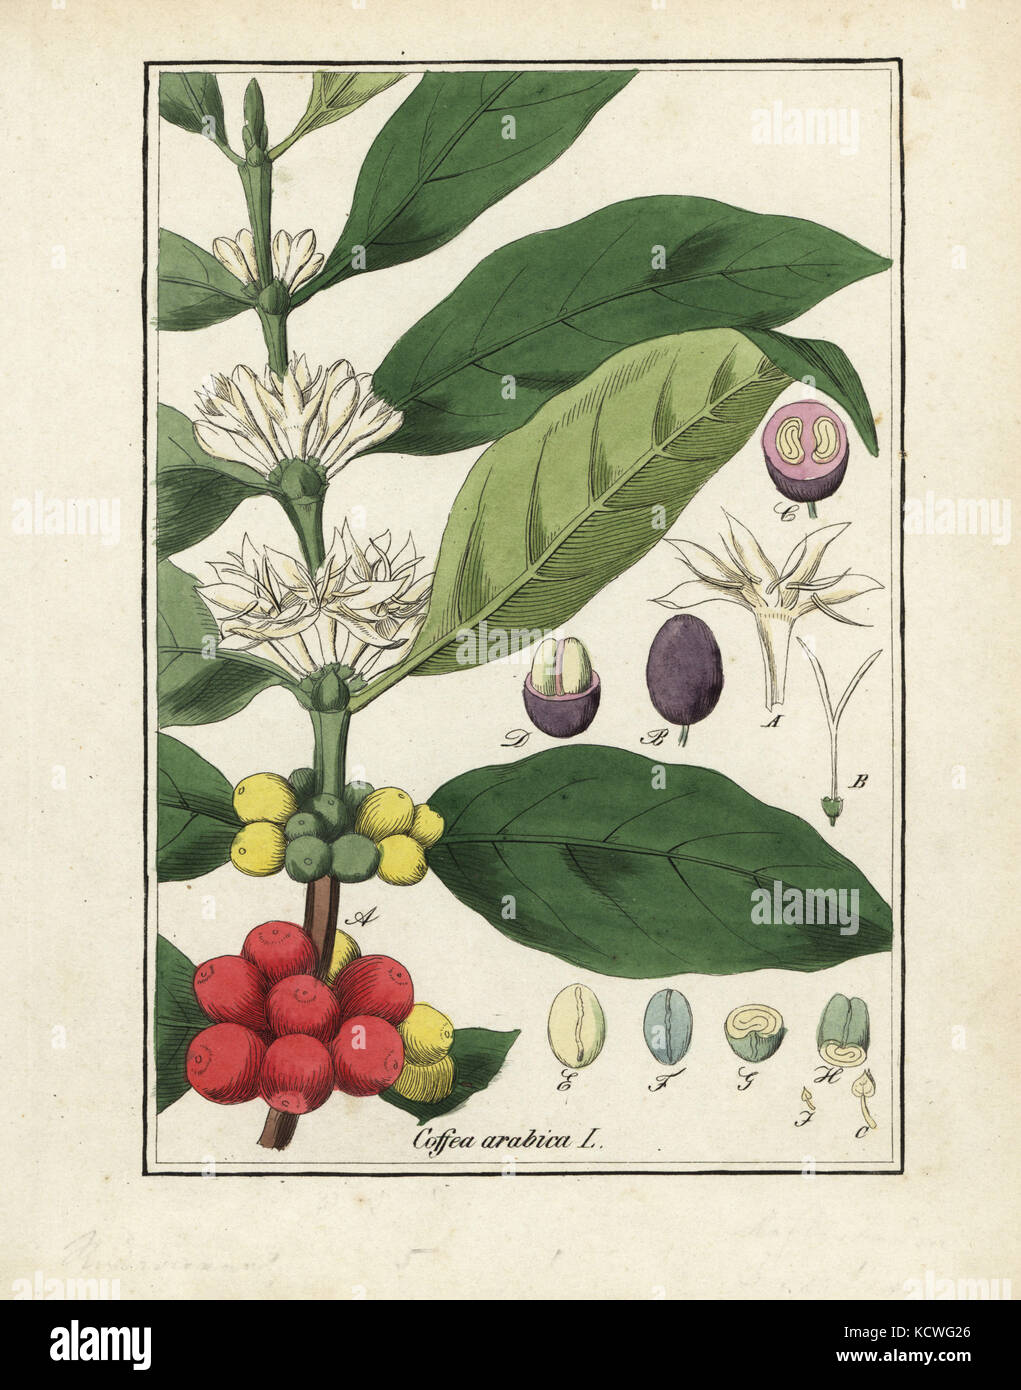 Coffee plant, Coffea arabica, with flowers, beans and seeds. Handcoloured copperplate engraving from Edouard Winkler's Getreue Abbildung aller in der Pharmacopoea (True Pictures of Pharmacopeia), Leipzig, 1843. Stock Photo